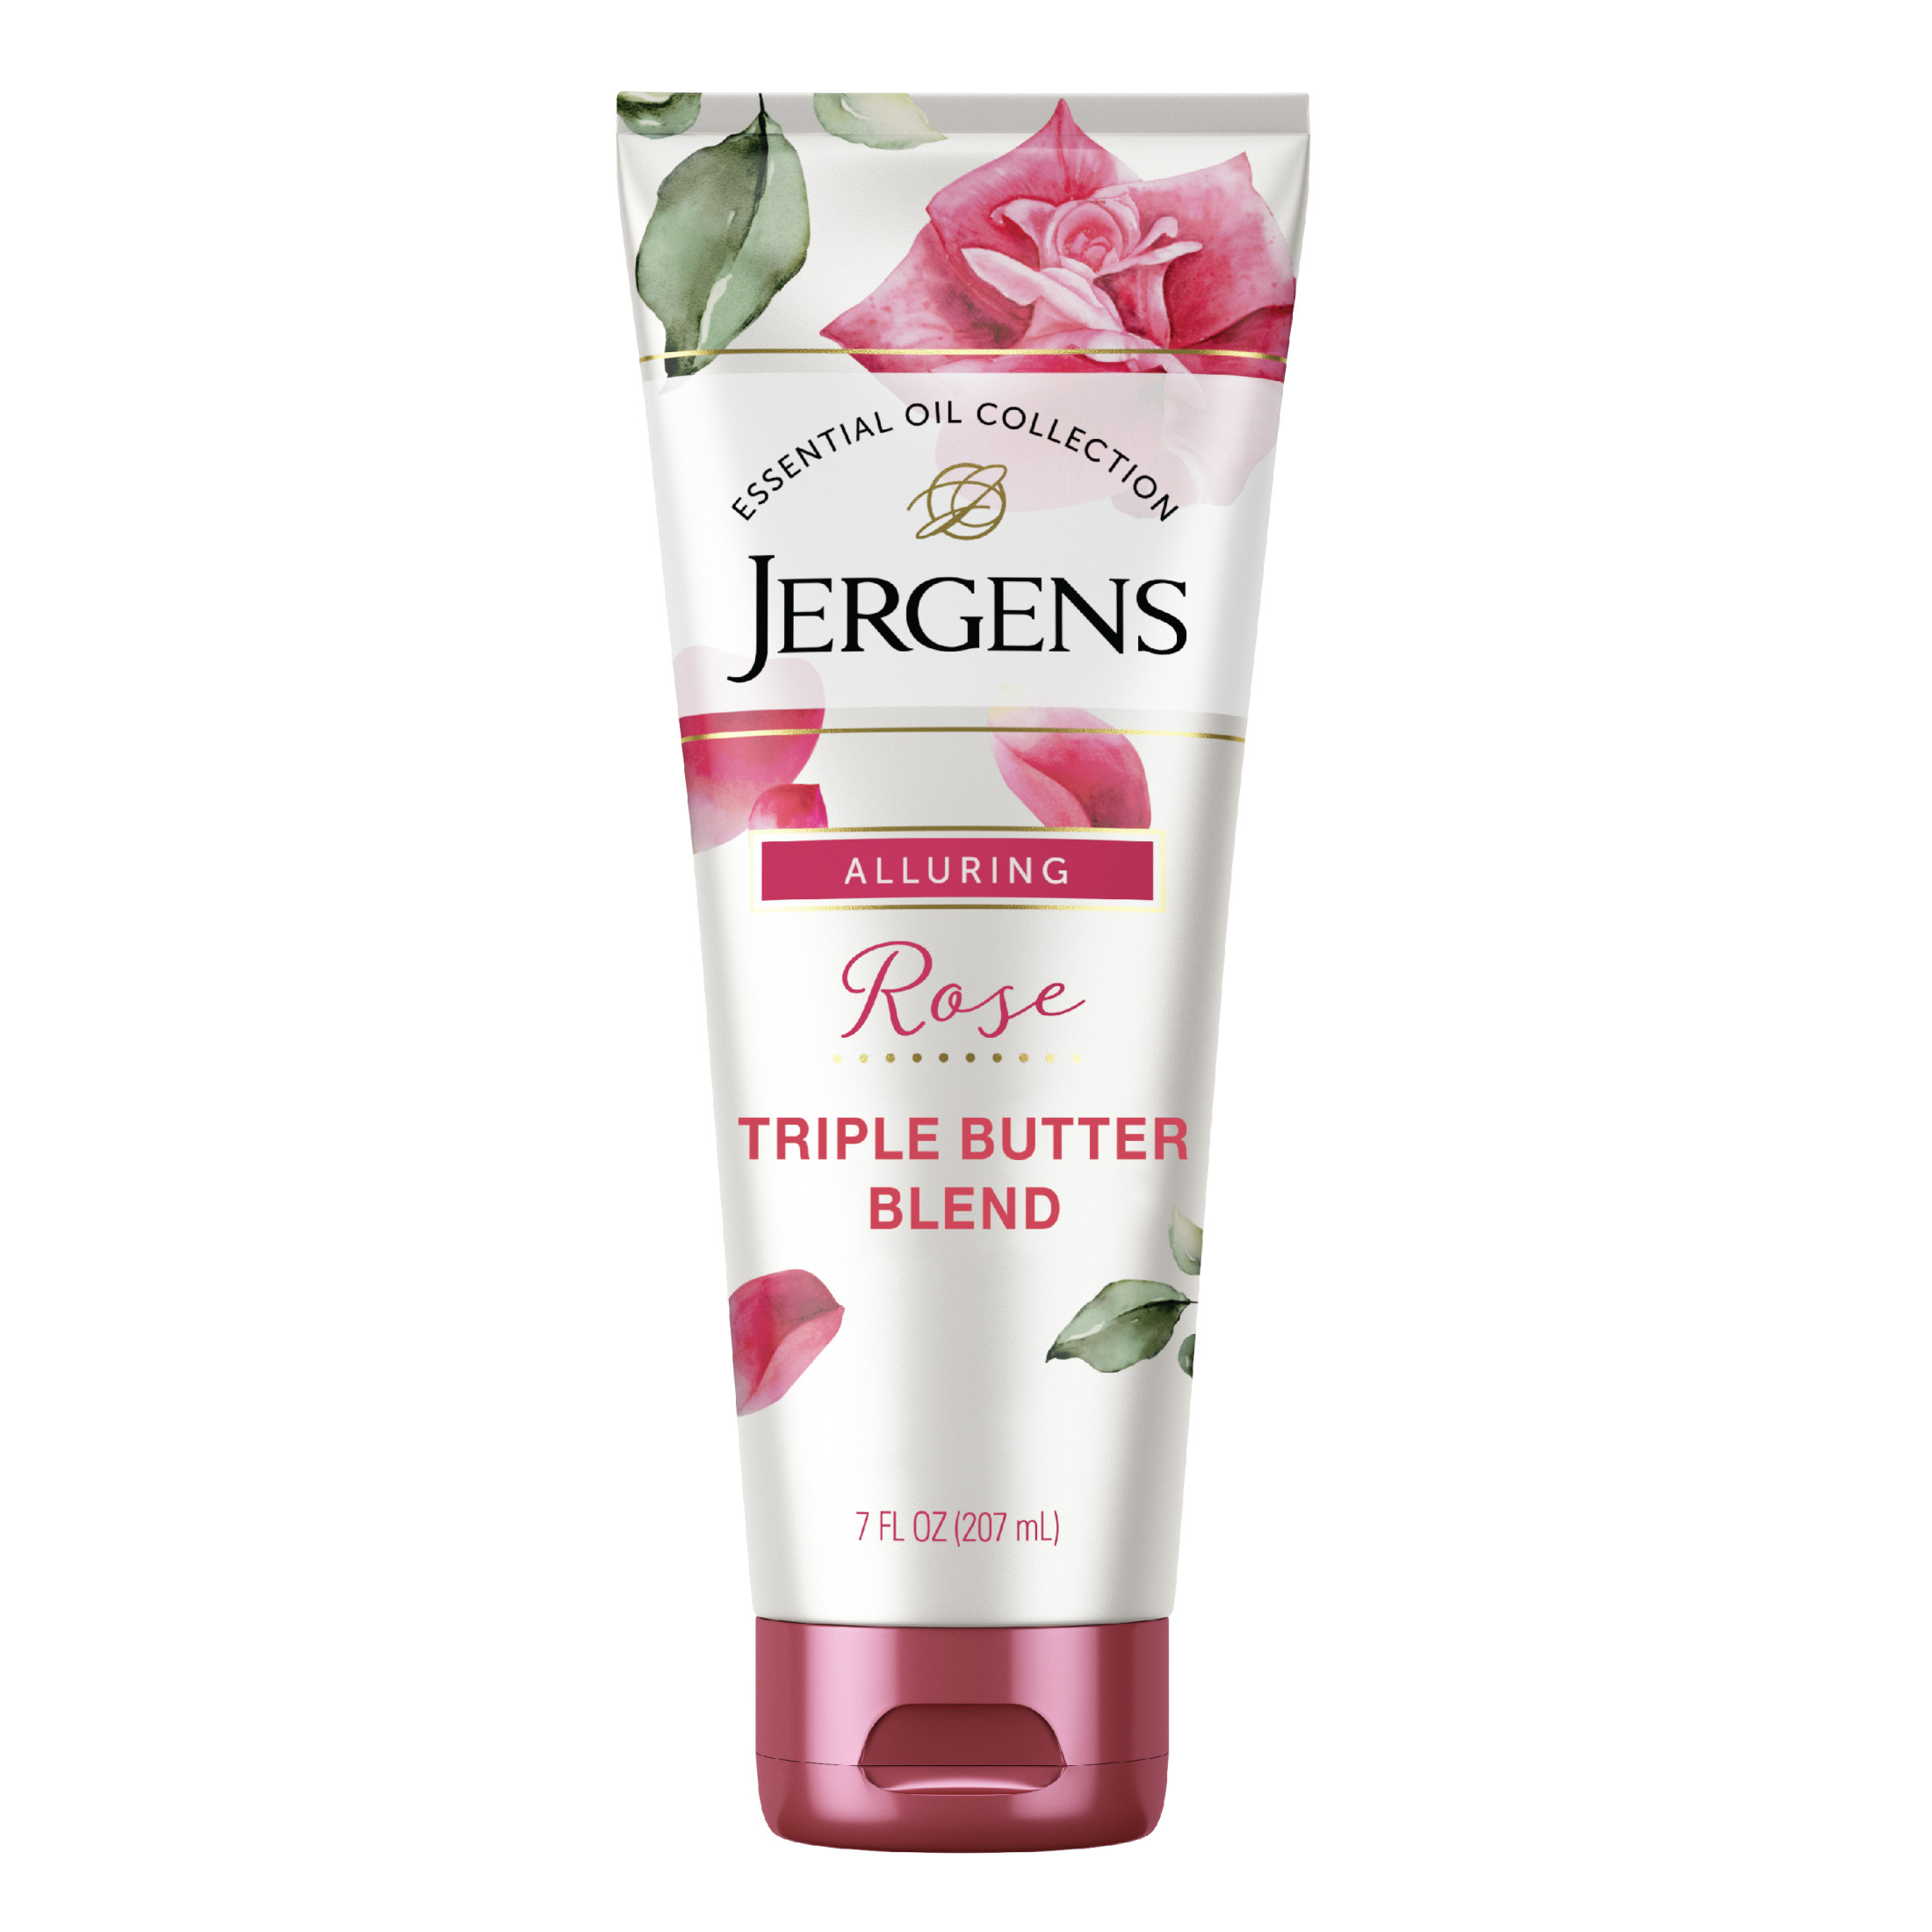 Jergens Hand and Body Lotion, Rose Body Butter Lotion, with Camellia Essential Oil, 7 Oz - image 1 of 10